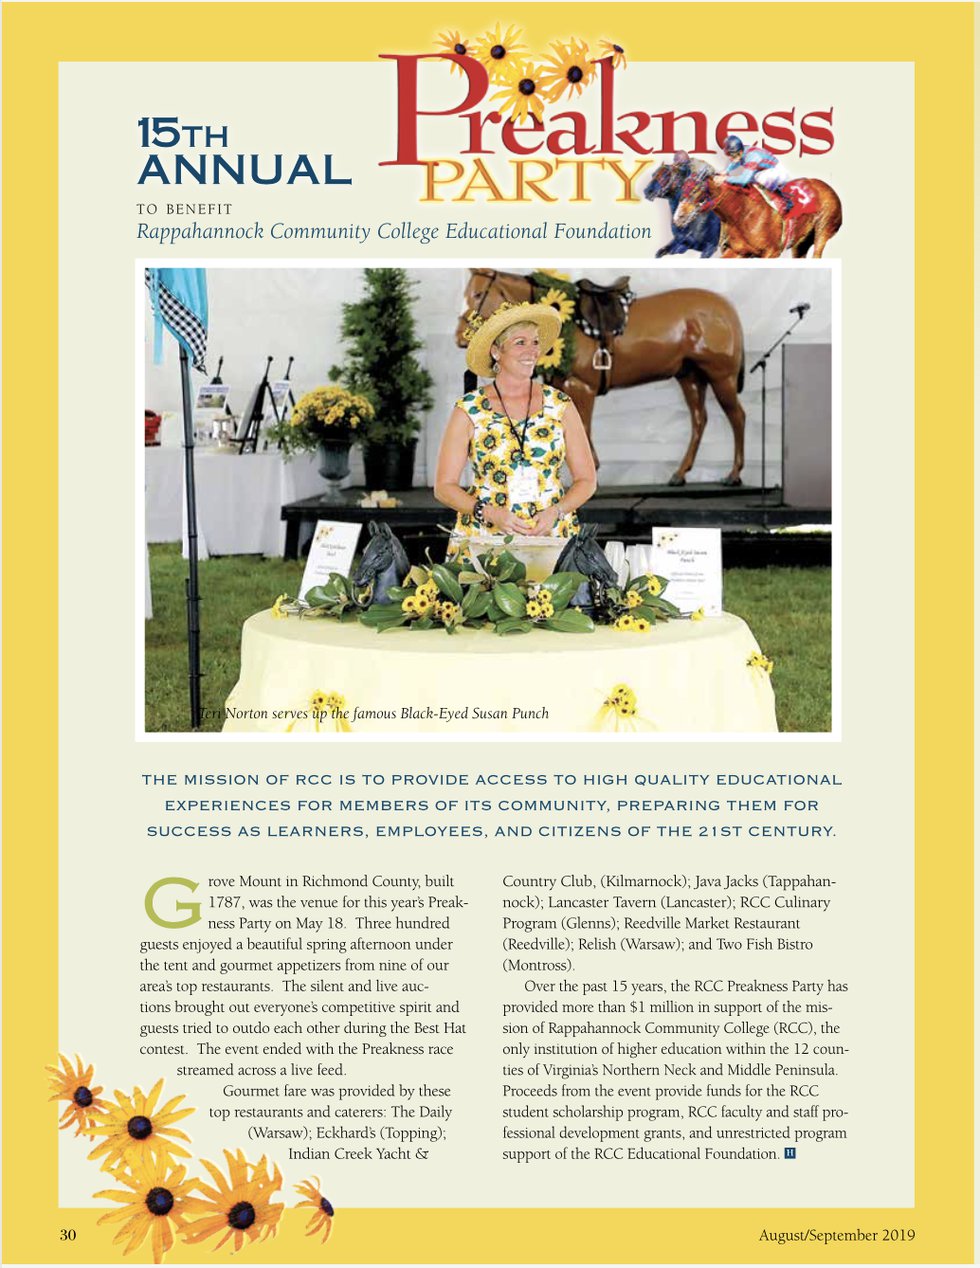 15th Annual Preakness Party to Benefit Rappahannock Community College Educational Foundation